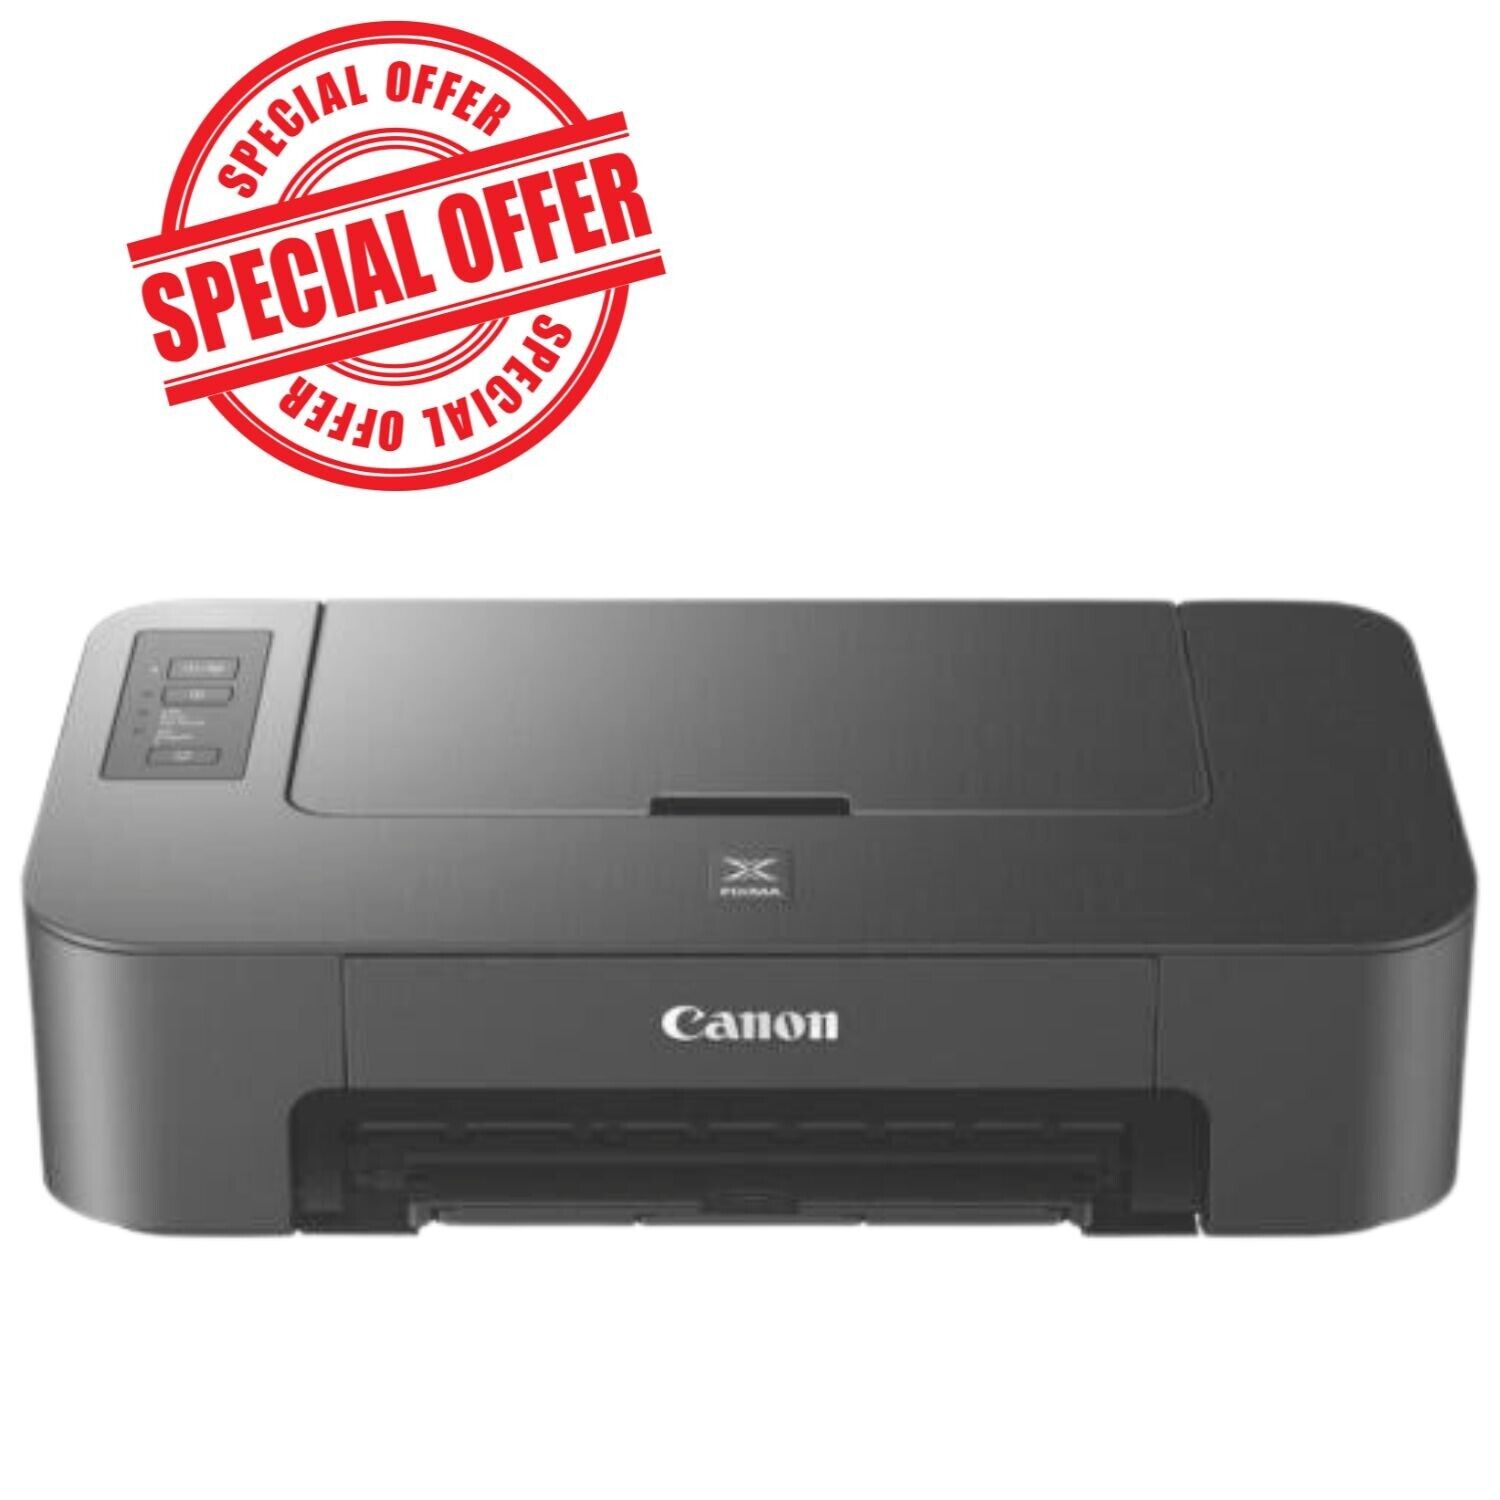 Canon Pixma Inkjet Color Printer, High Resolution Fast Speed Printing, No Ink